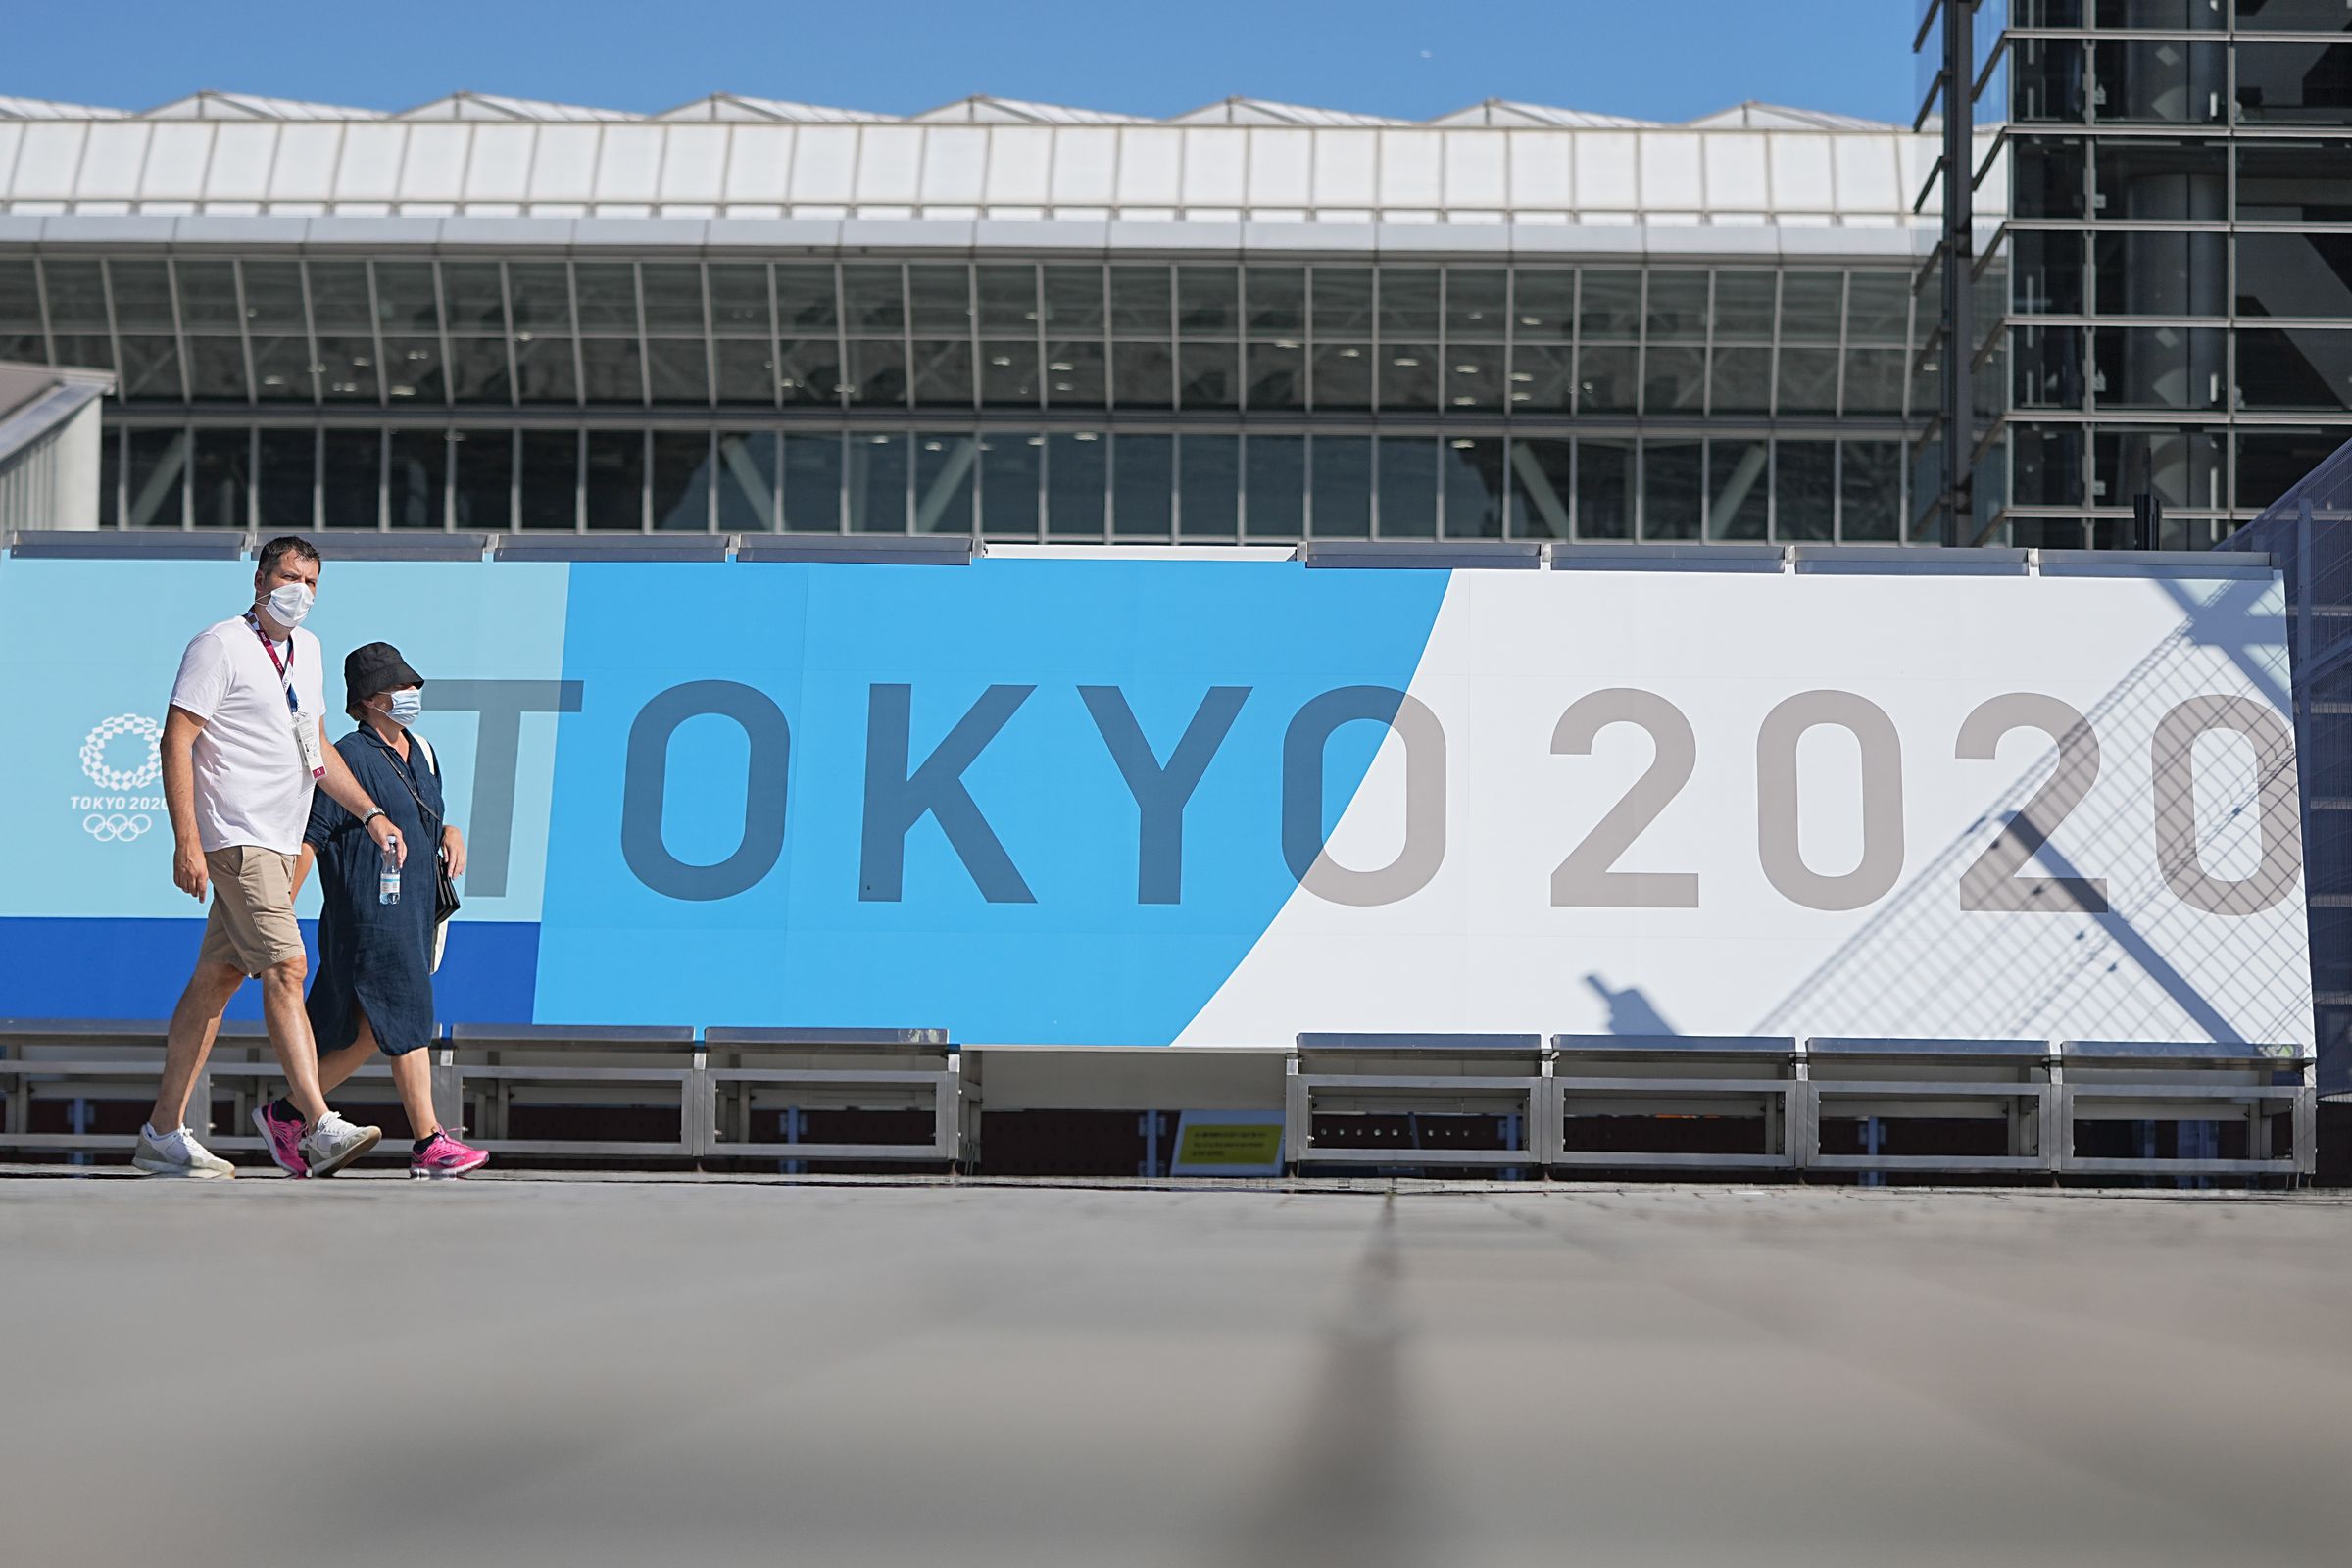 Before the Tokyo Olympics